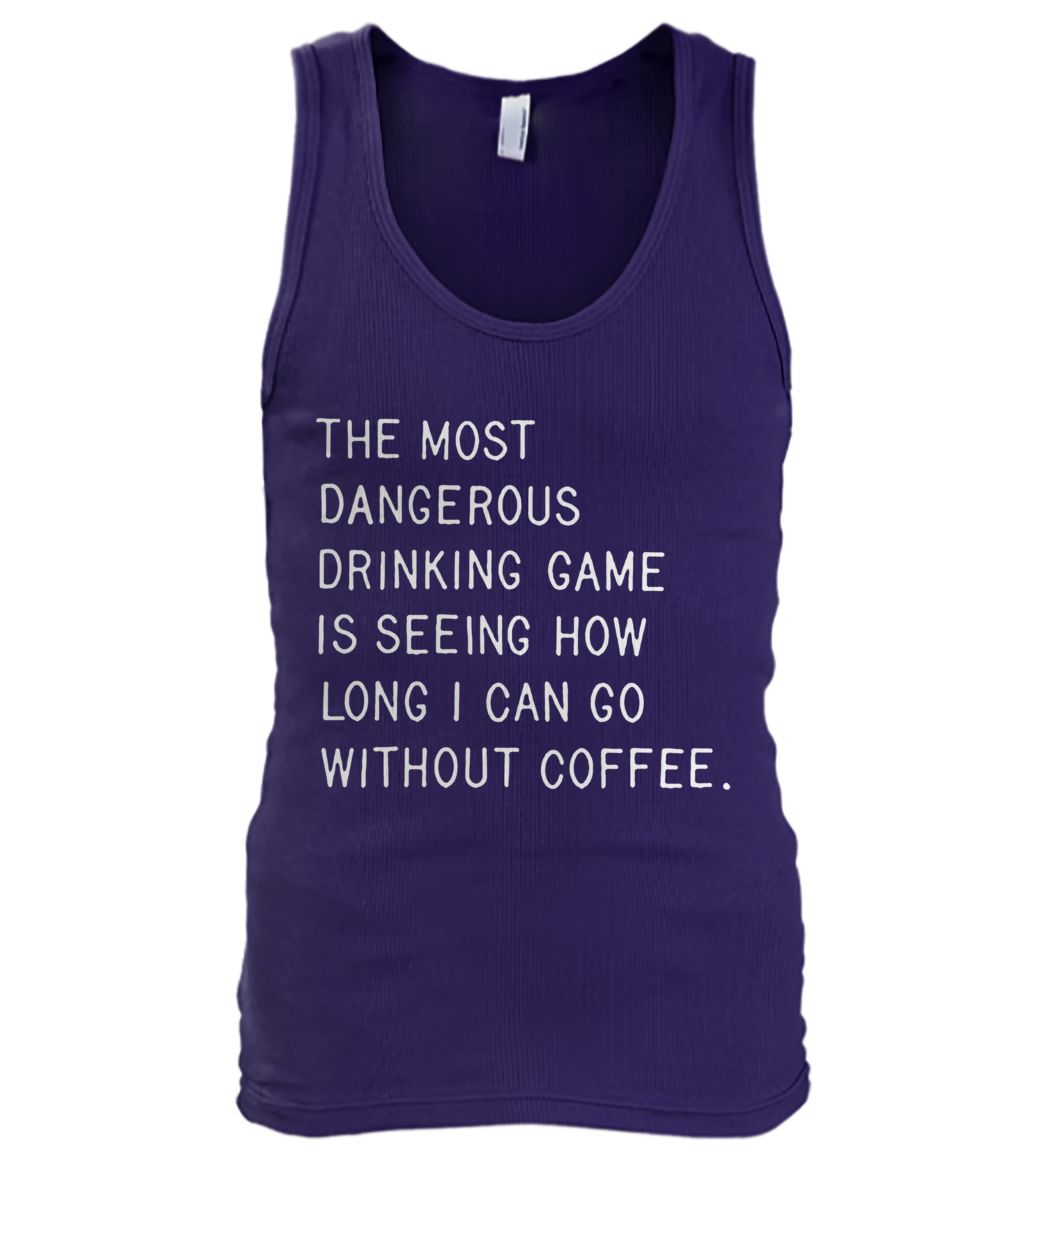 The most dangerous drinking game is seeing how long I can go without coffee men's tank top